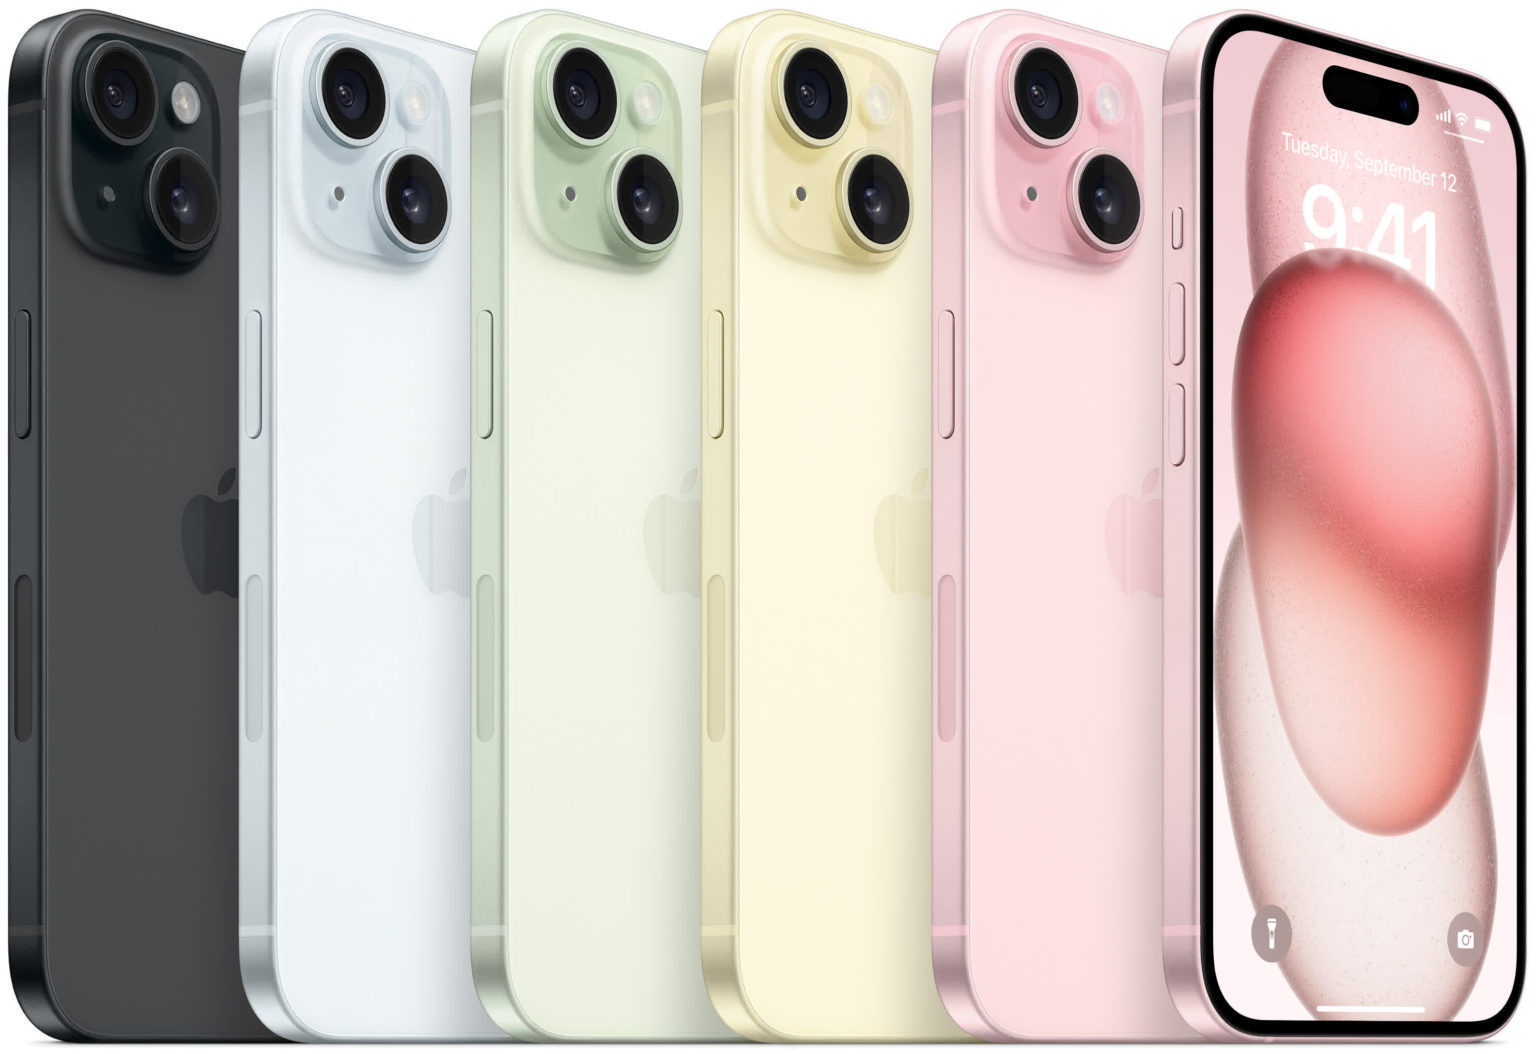 iPhone 15 launches using USB-C, brings 14 Pro features to the standard tier for $799